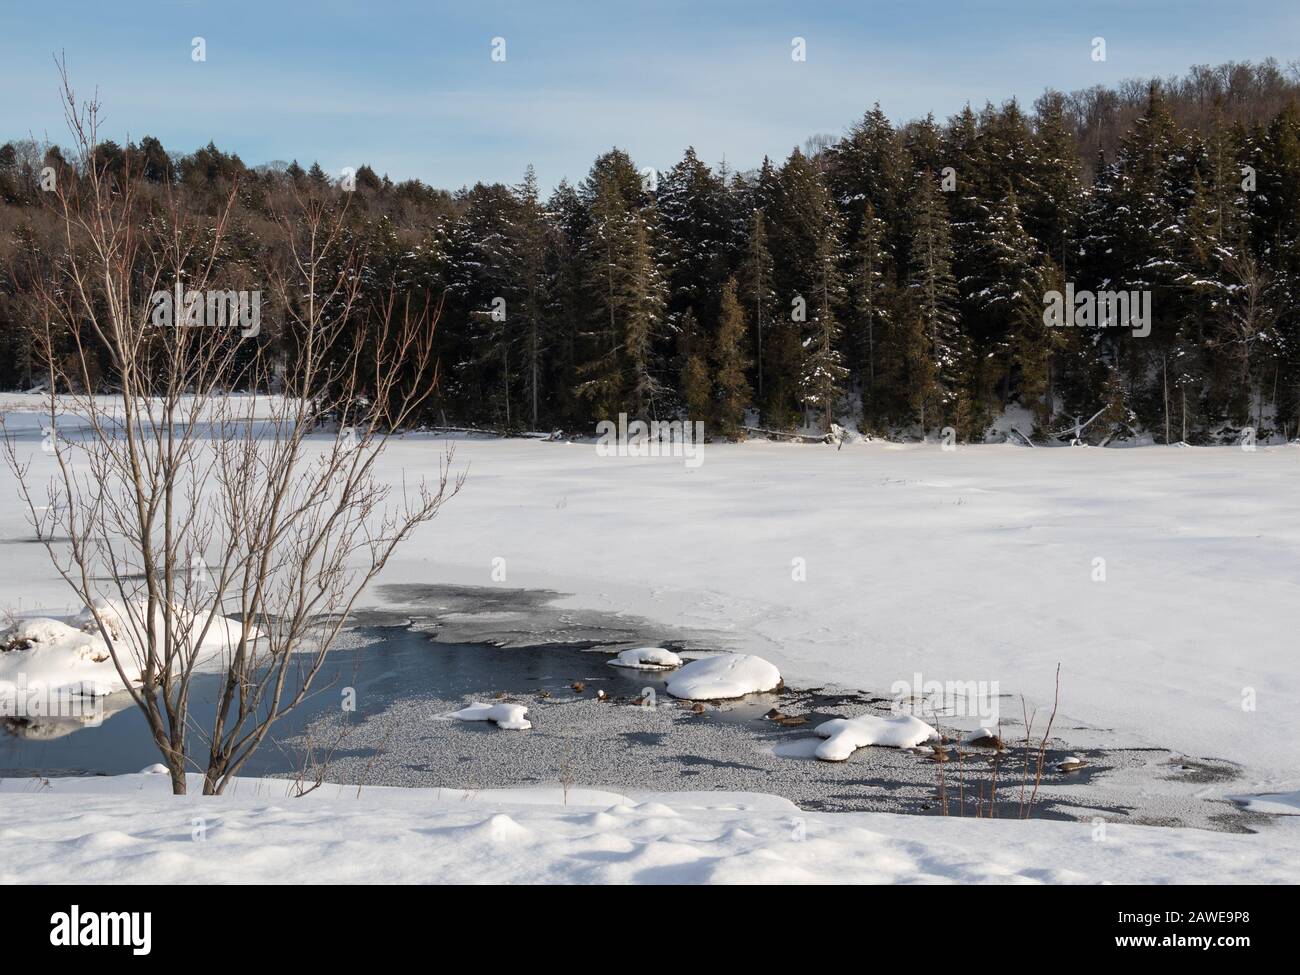 A snow covered lake under clear blue sky on a winter day in northern Ontario and evergreen forest lining the shore. Stock Photo